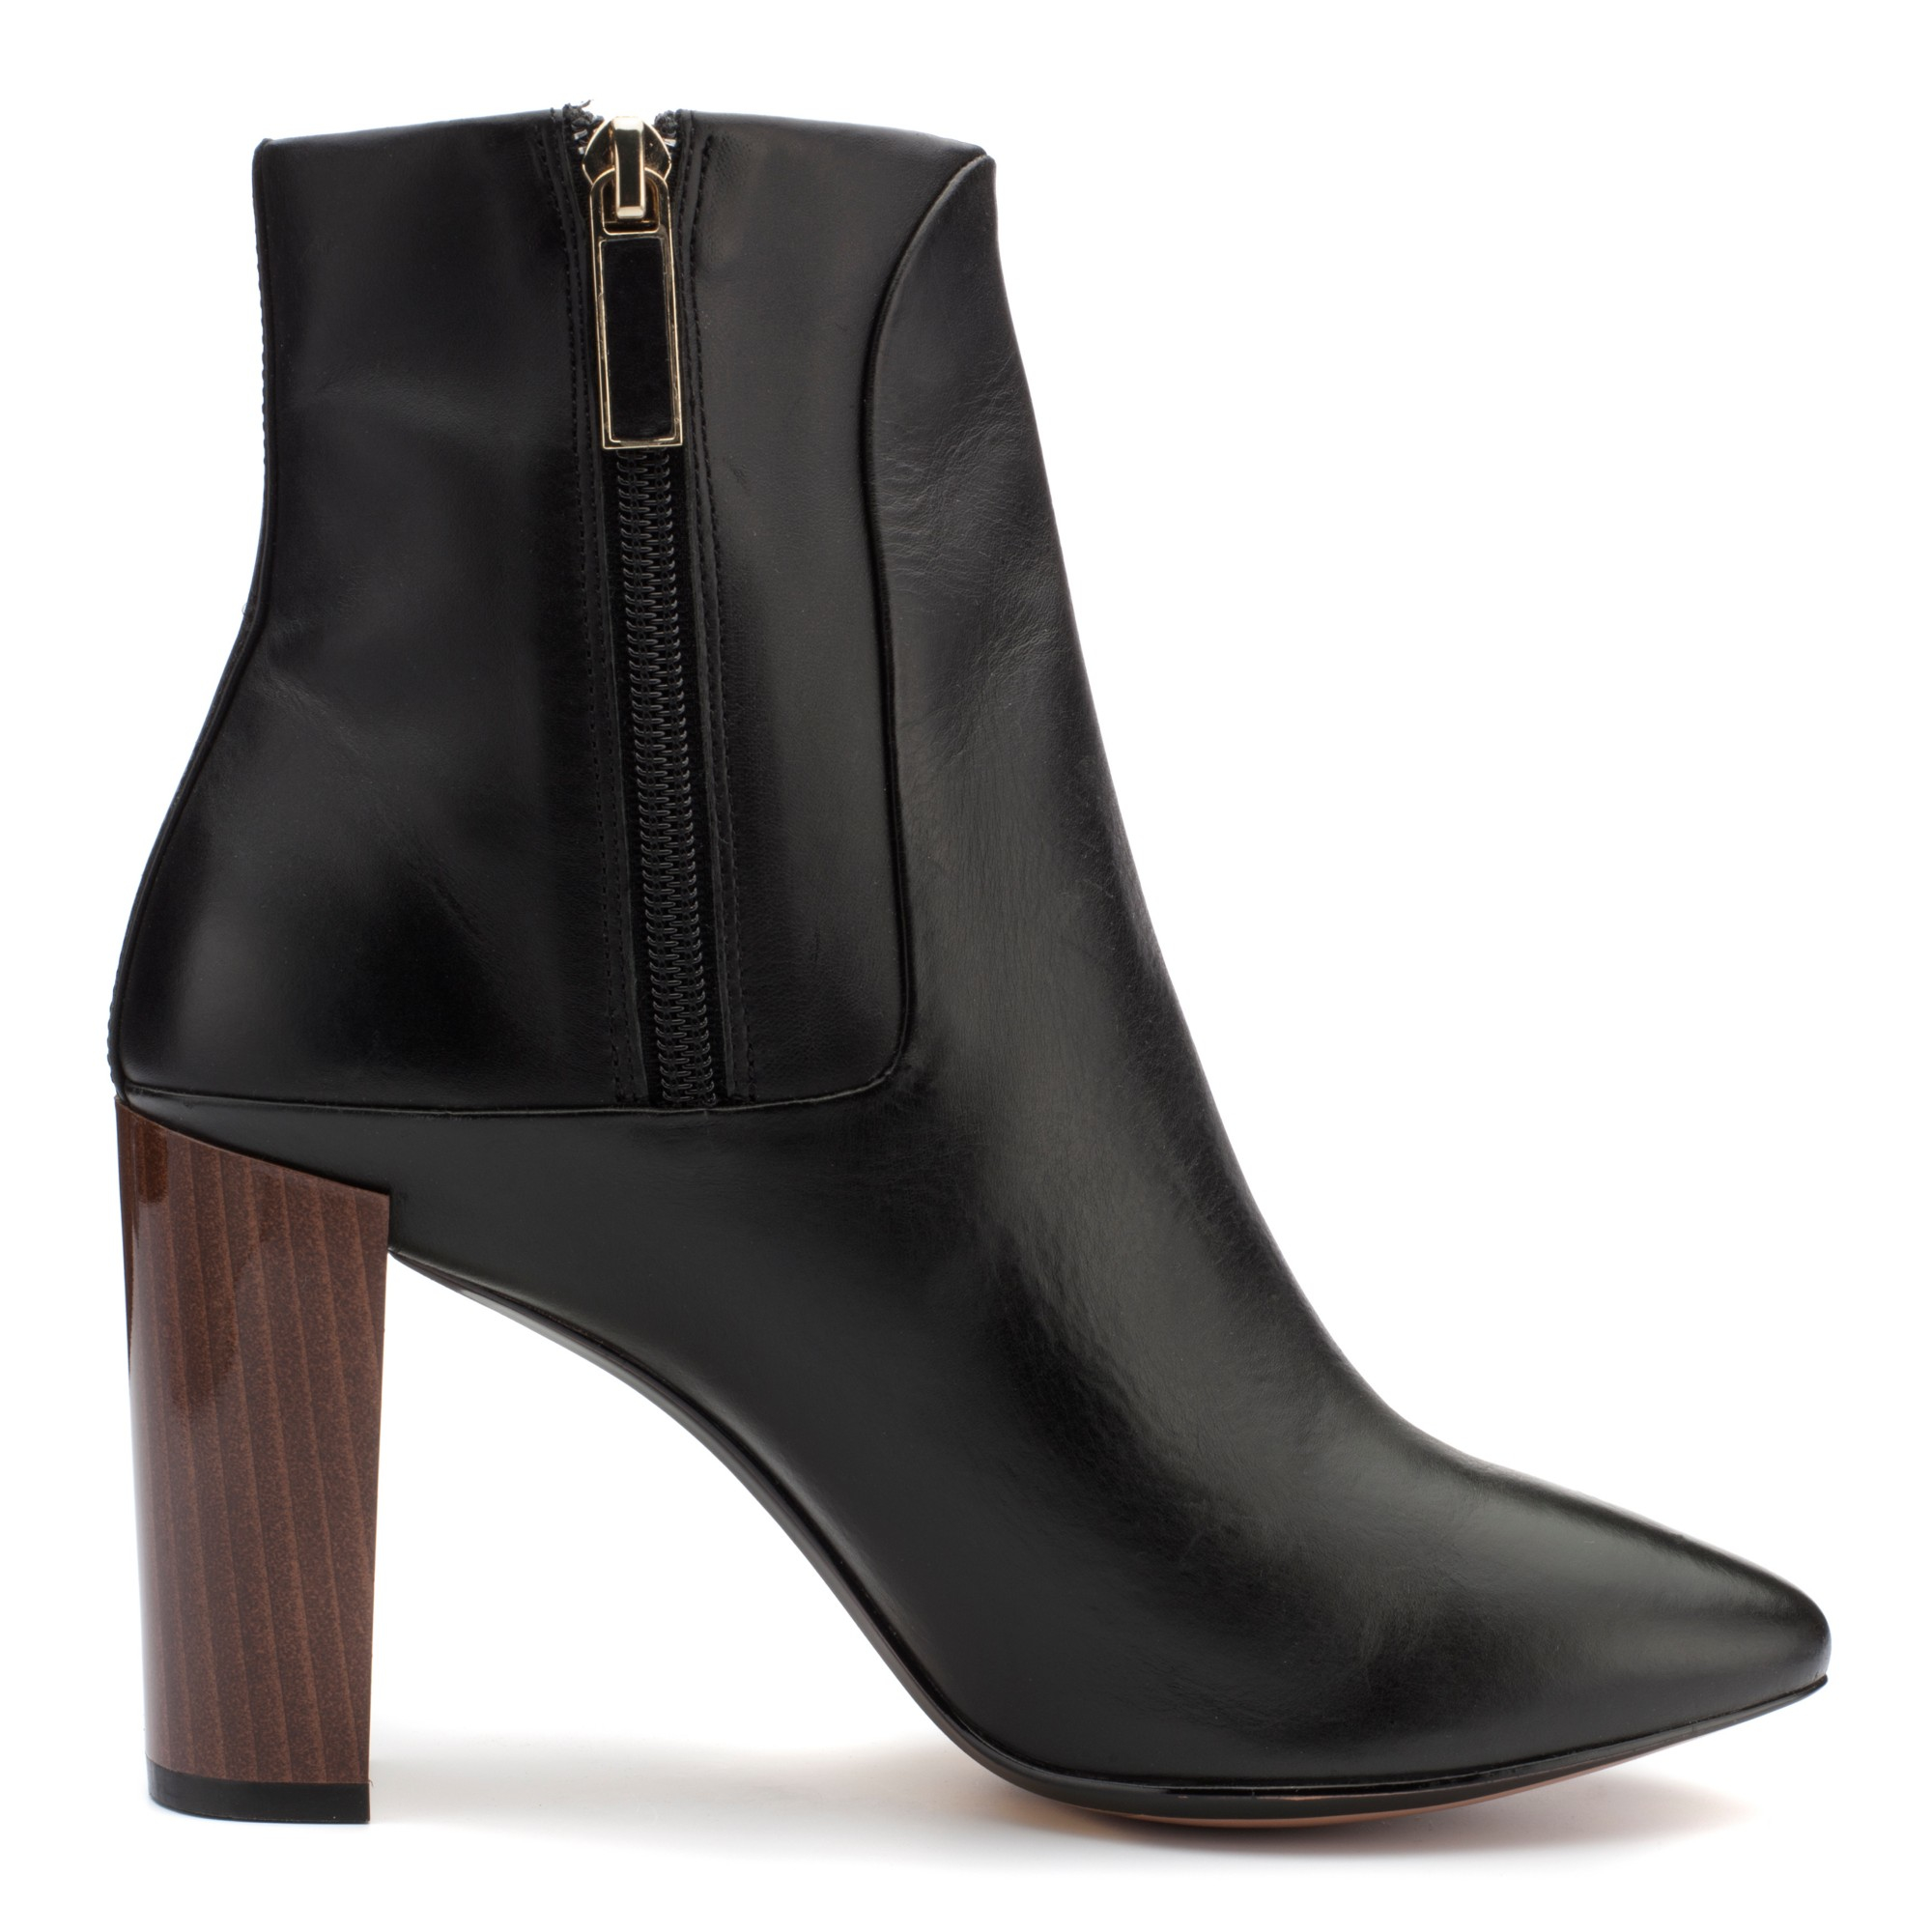 Ted baker Yamato Block Heel Ankle Boots in Black (Black Leather) | Lyst